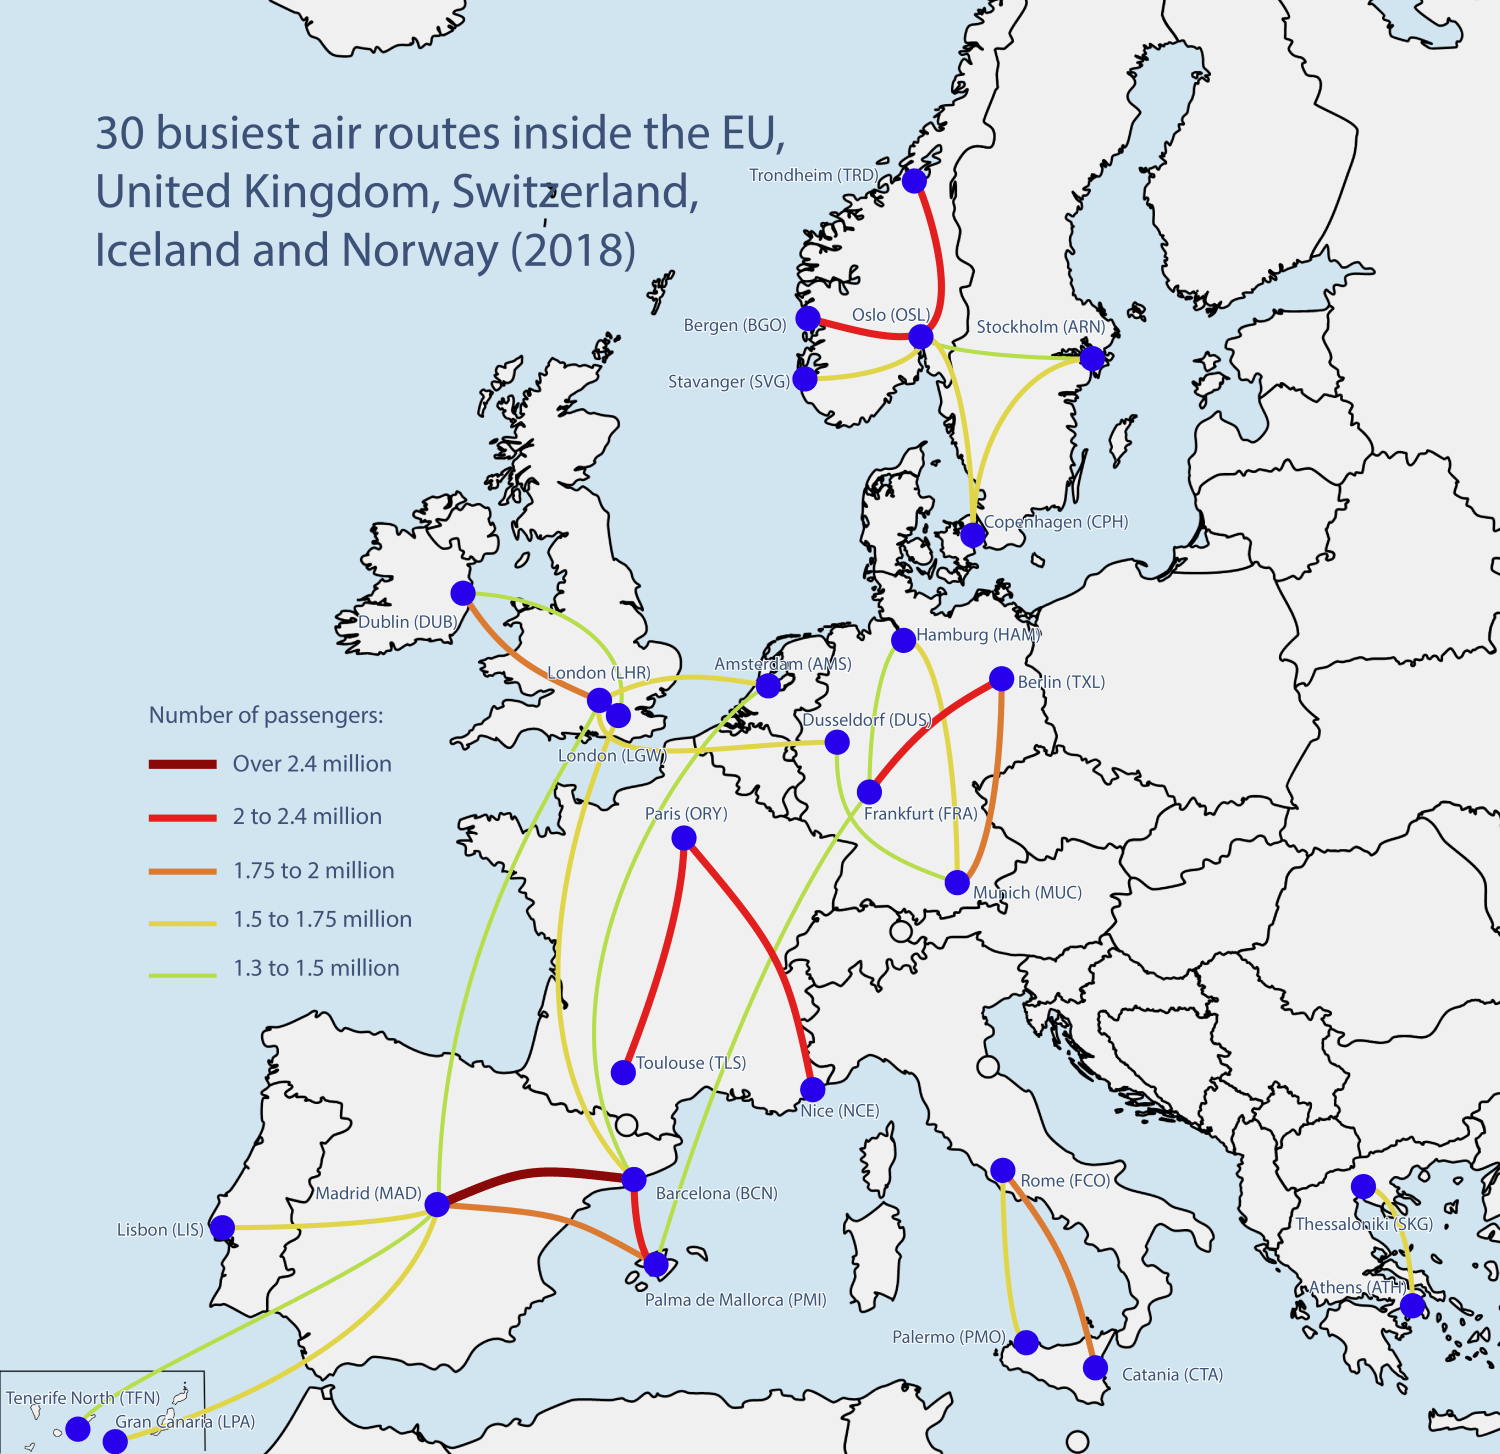 Busiest air routes by number of passengers in the EU-28 + EEA in 2018